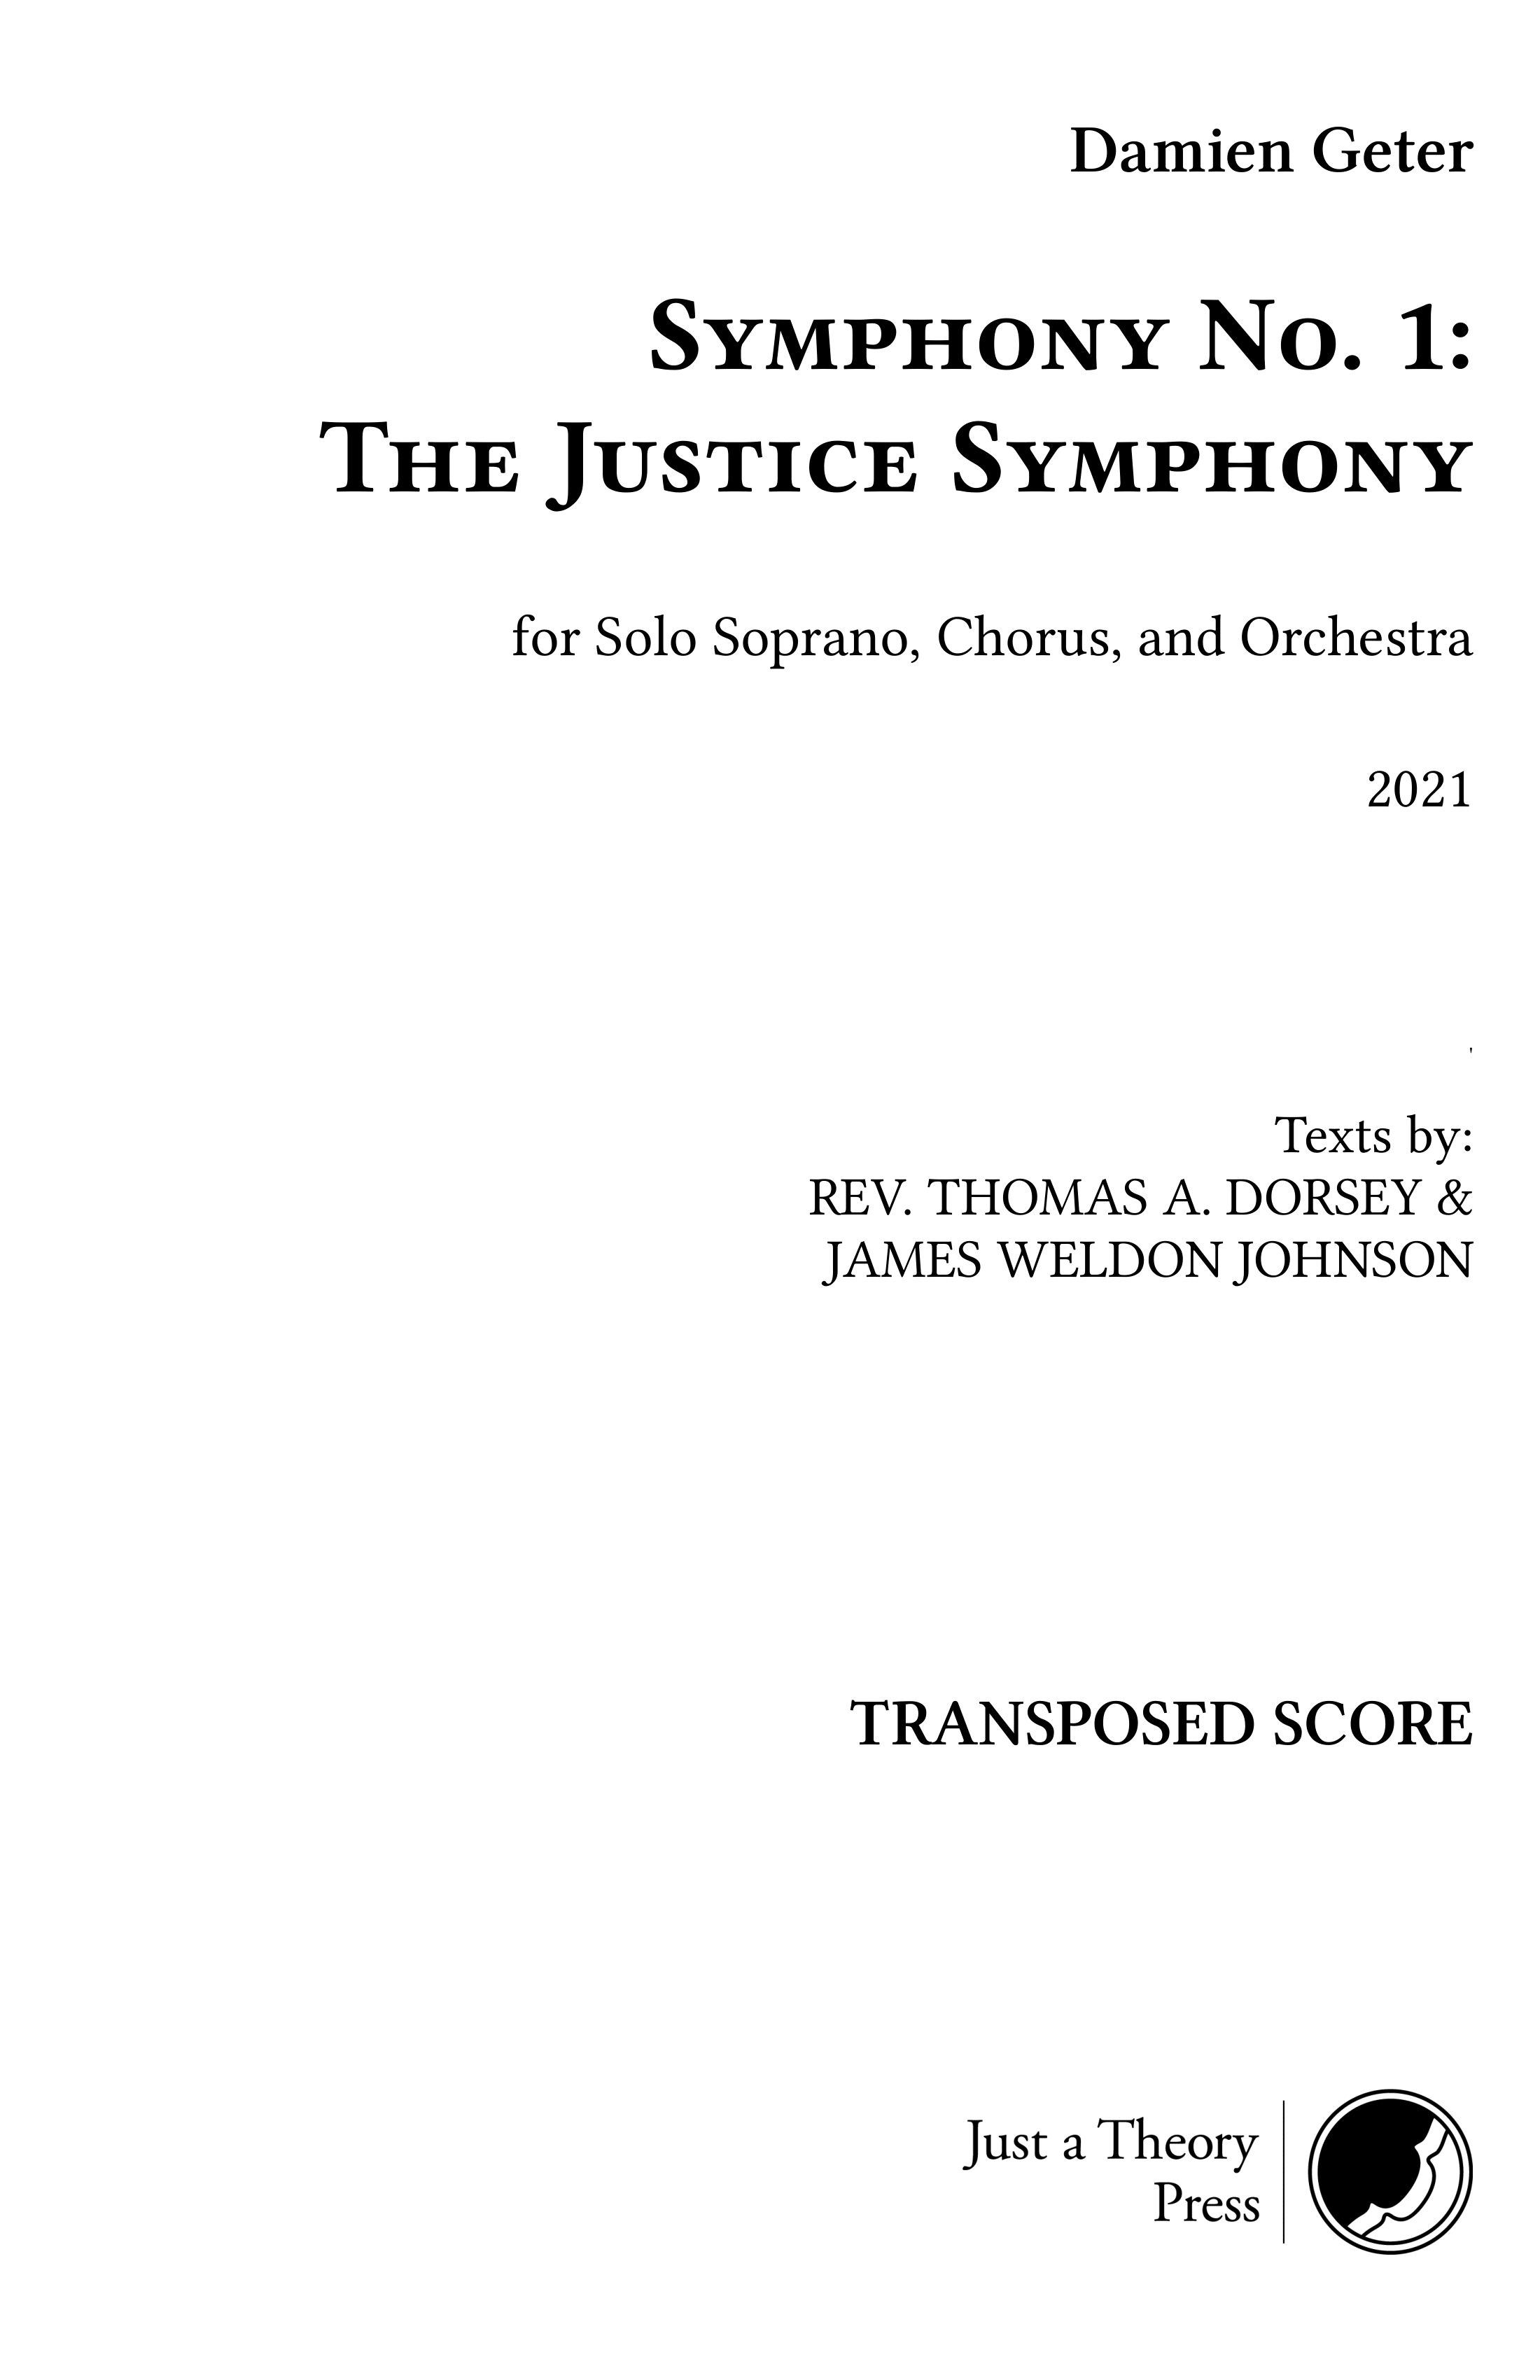 The Justice Symphony